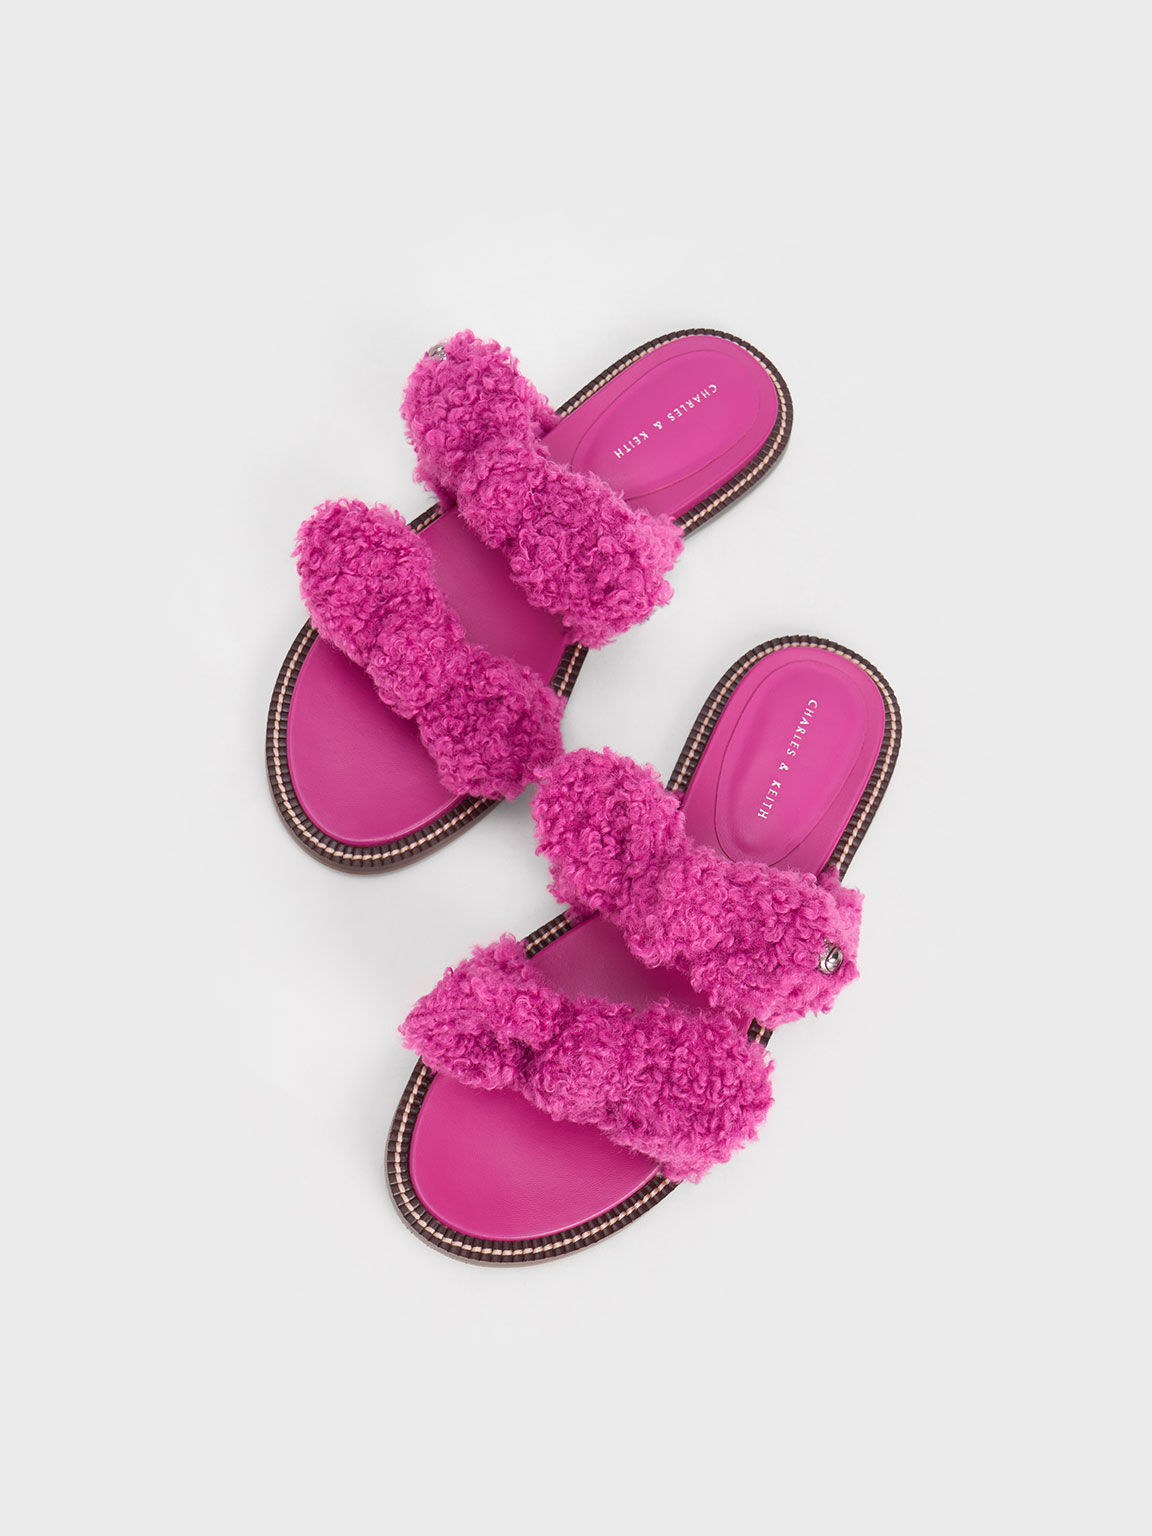 Lotso Furry Double Knotted Slide Sandals, Fuchsia, hi-res